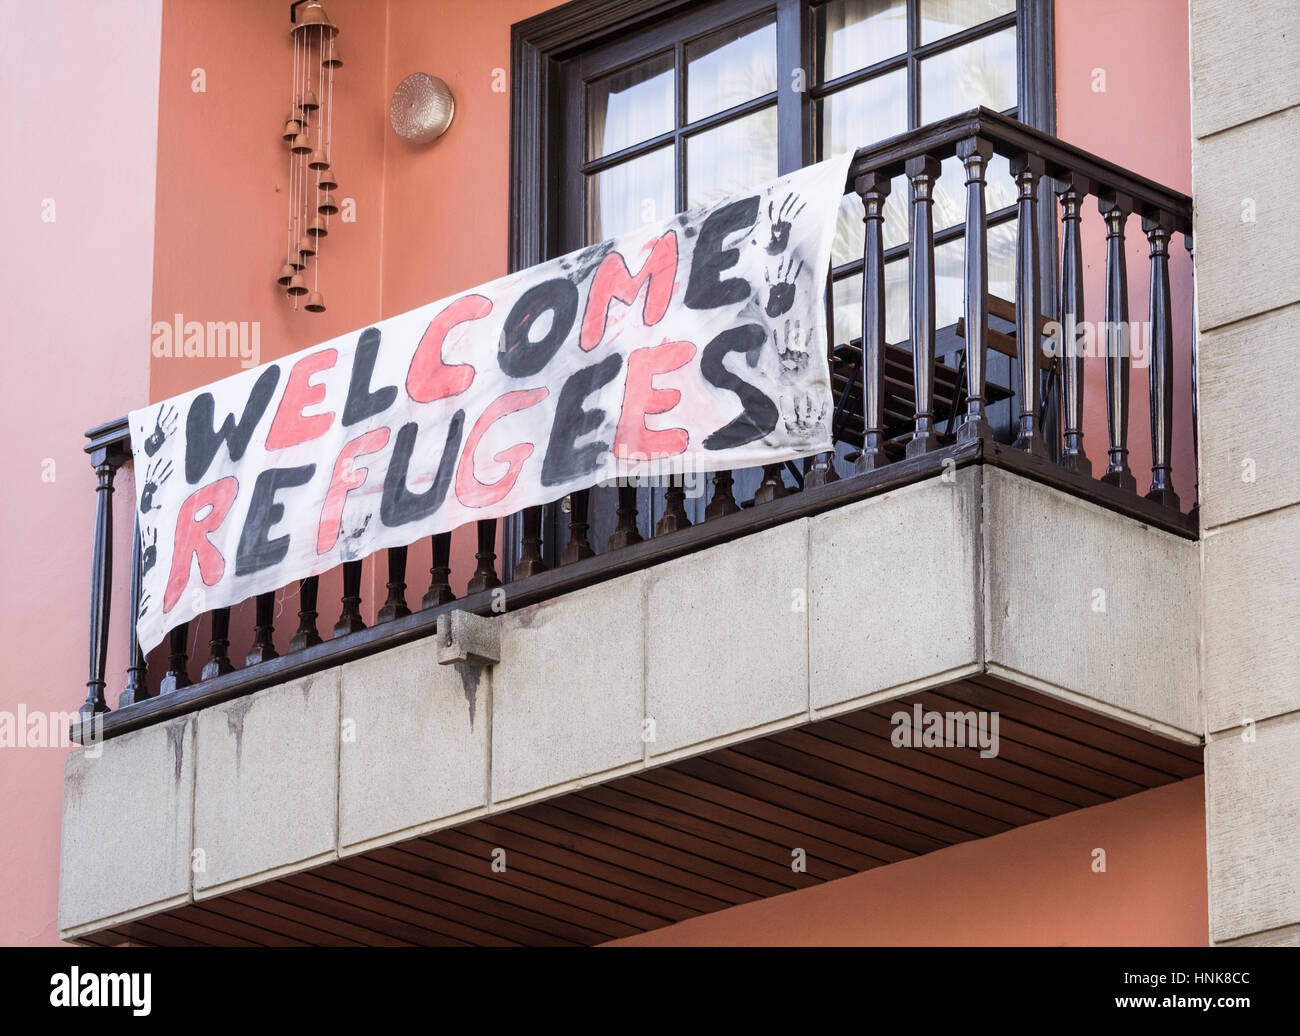 Refugees welcom banner draped over apartment in Spain Stock Photo